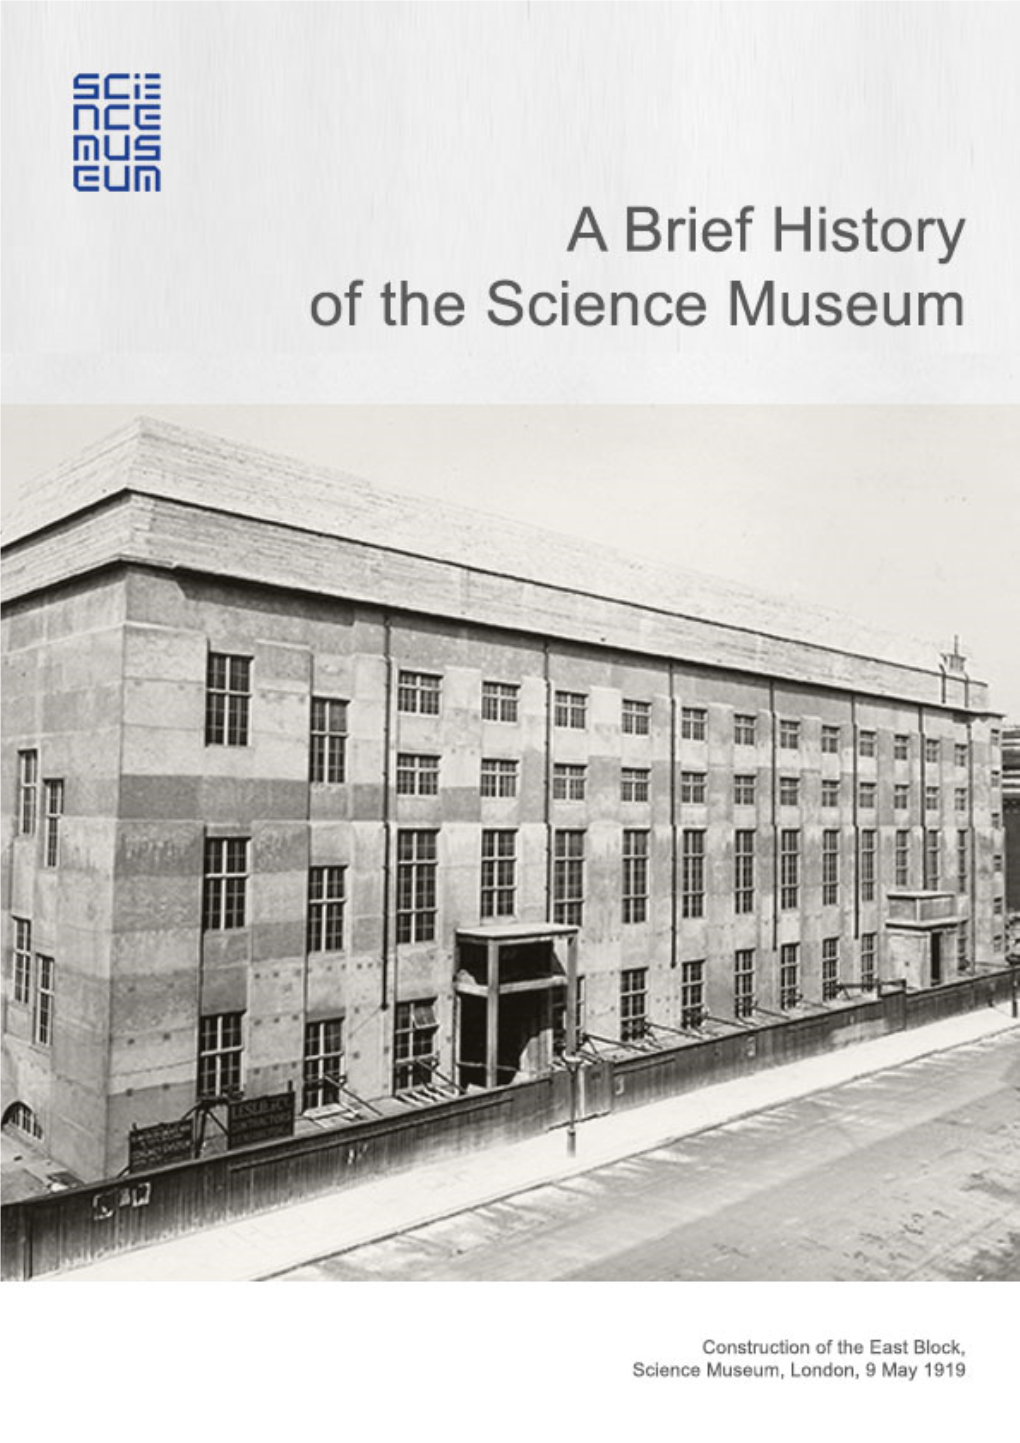 A Brief History of the Science Museum